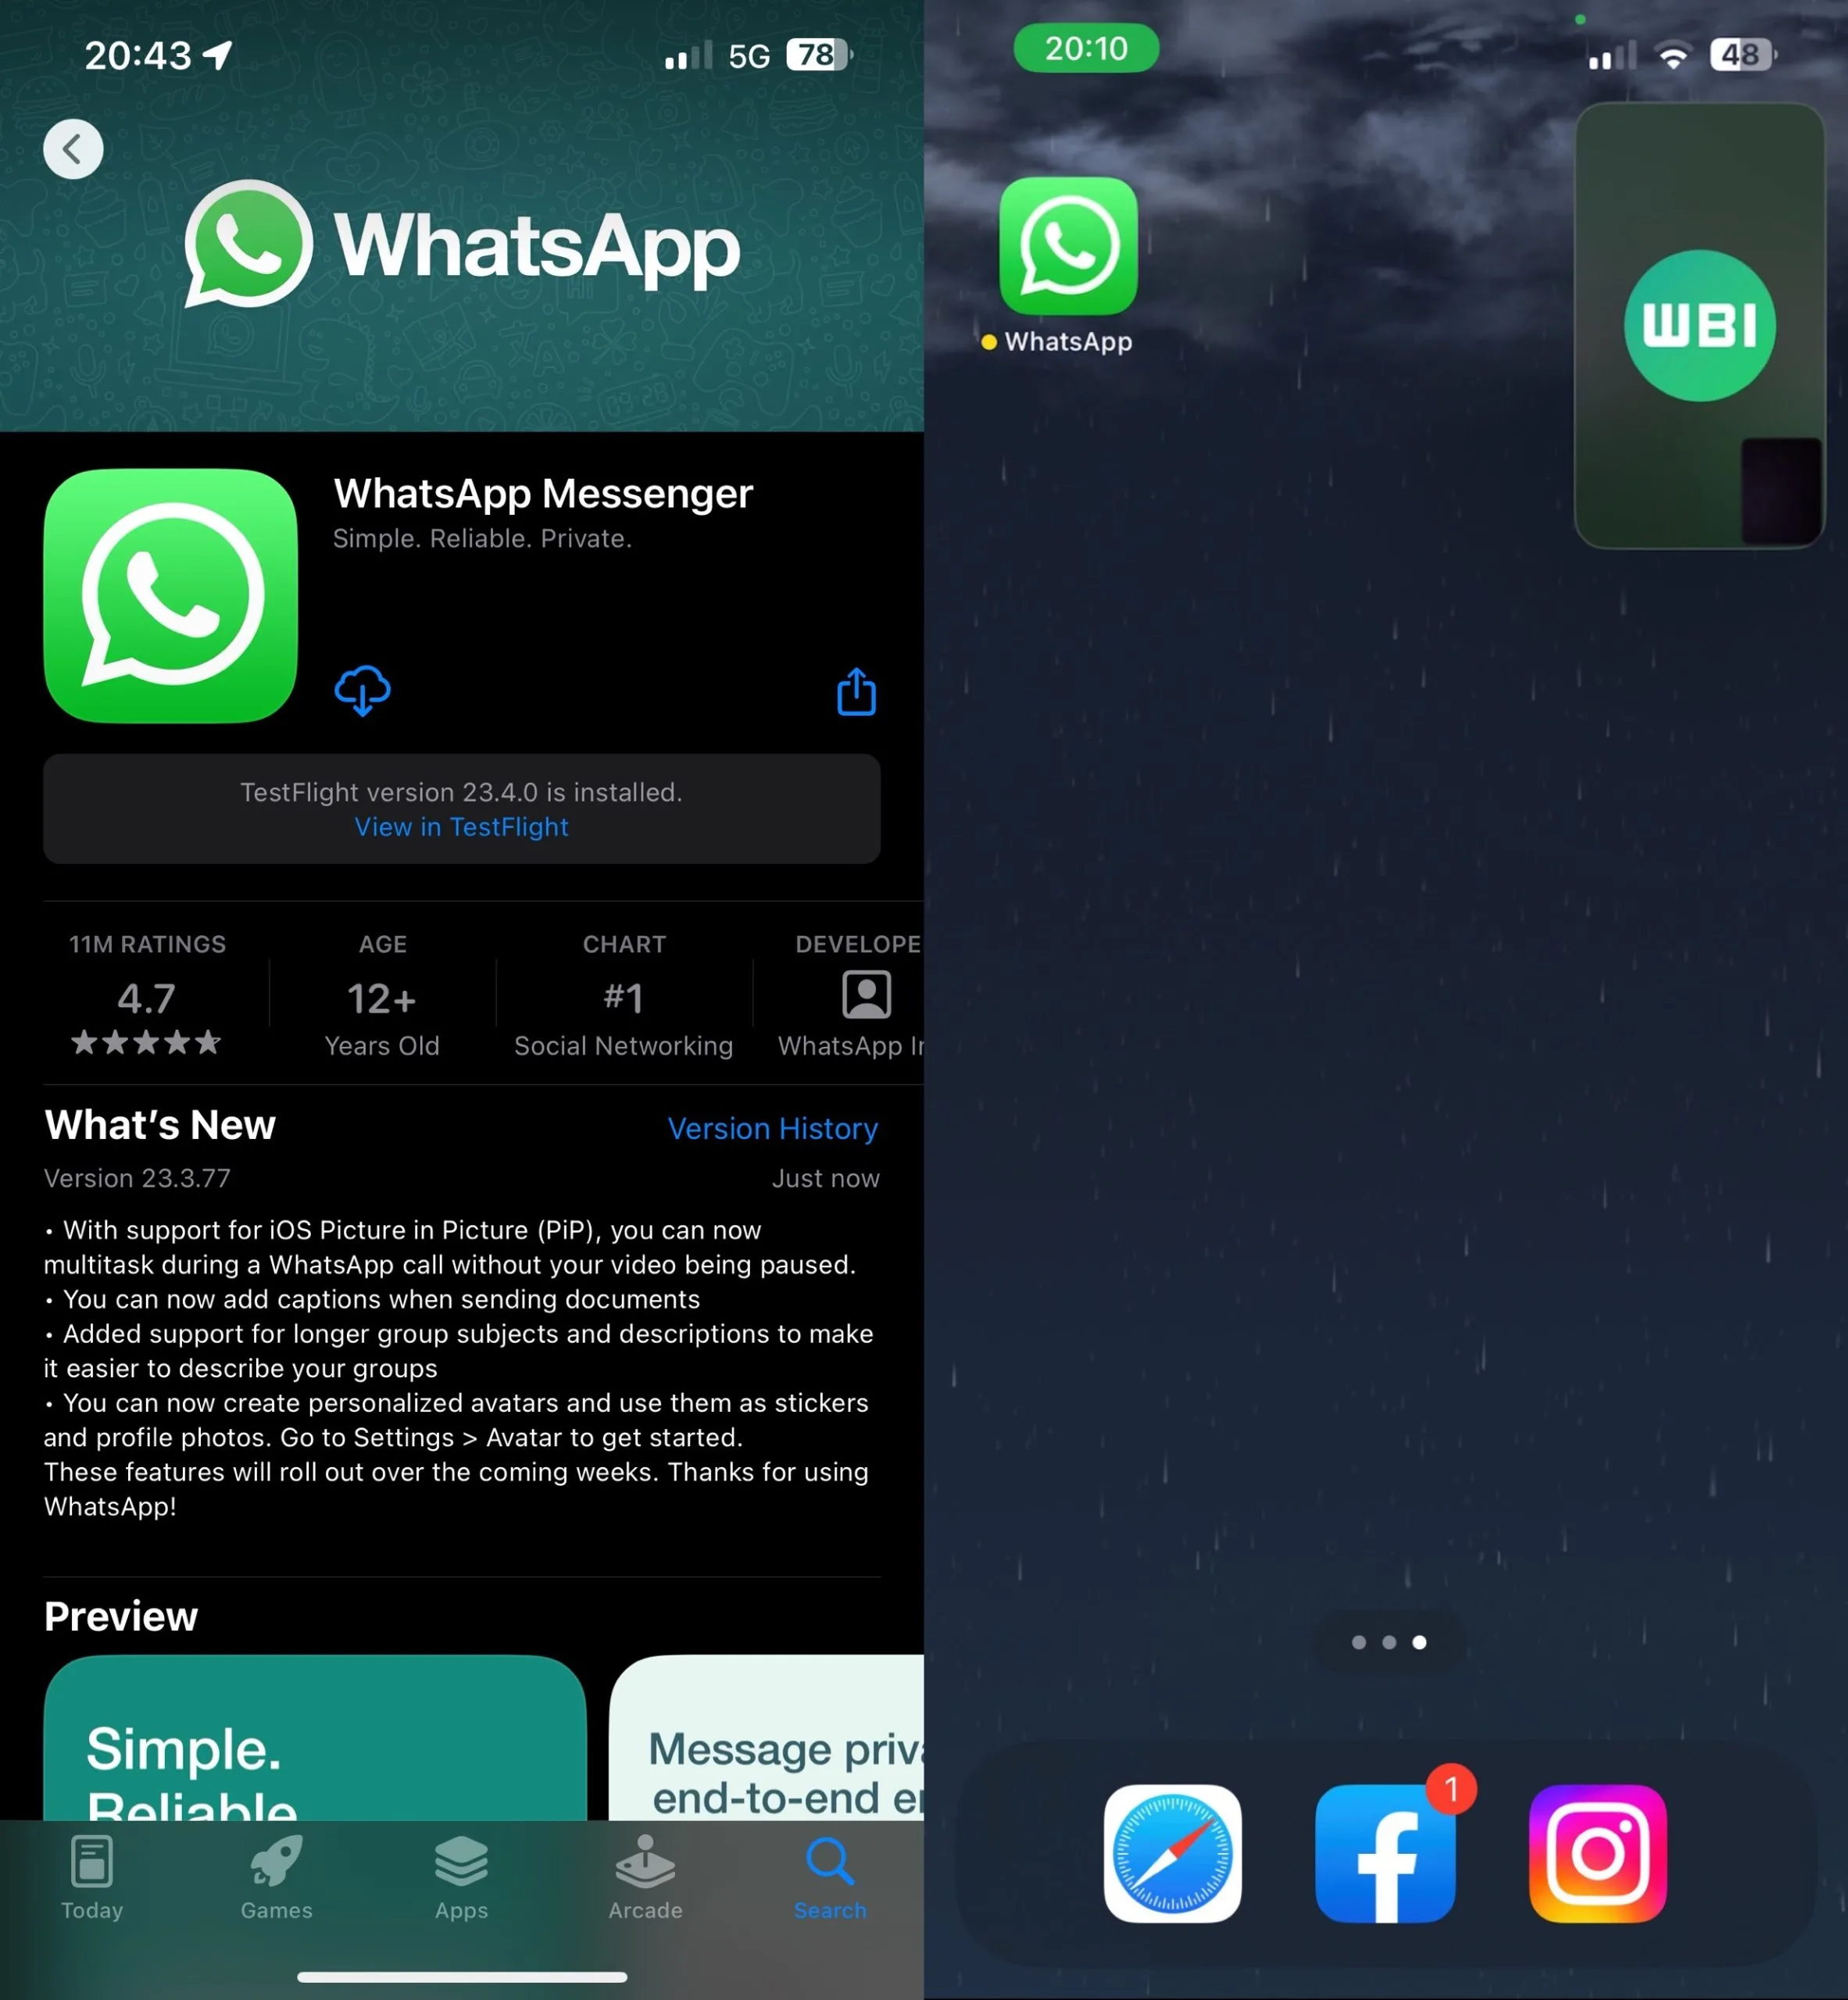 WhatsApp for iOS 23.3.77: What’s New?